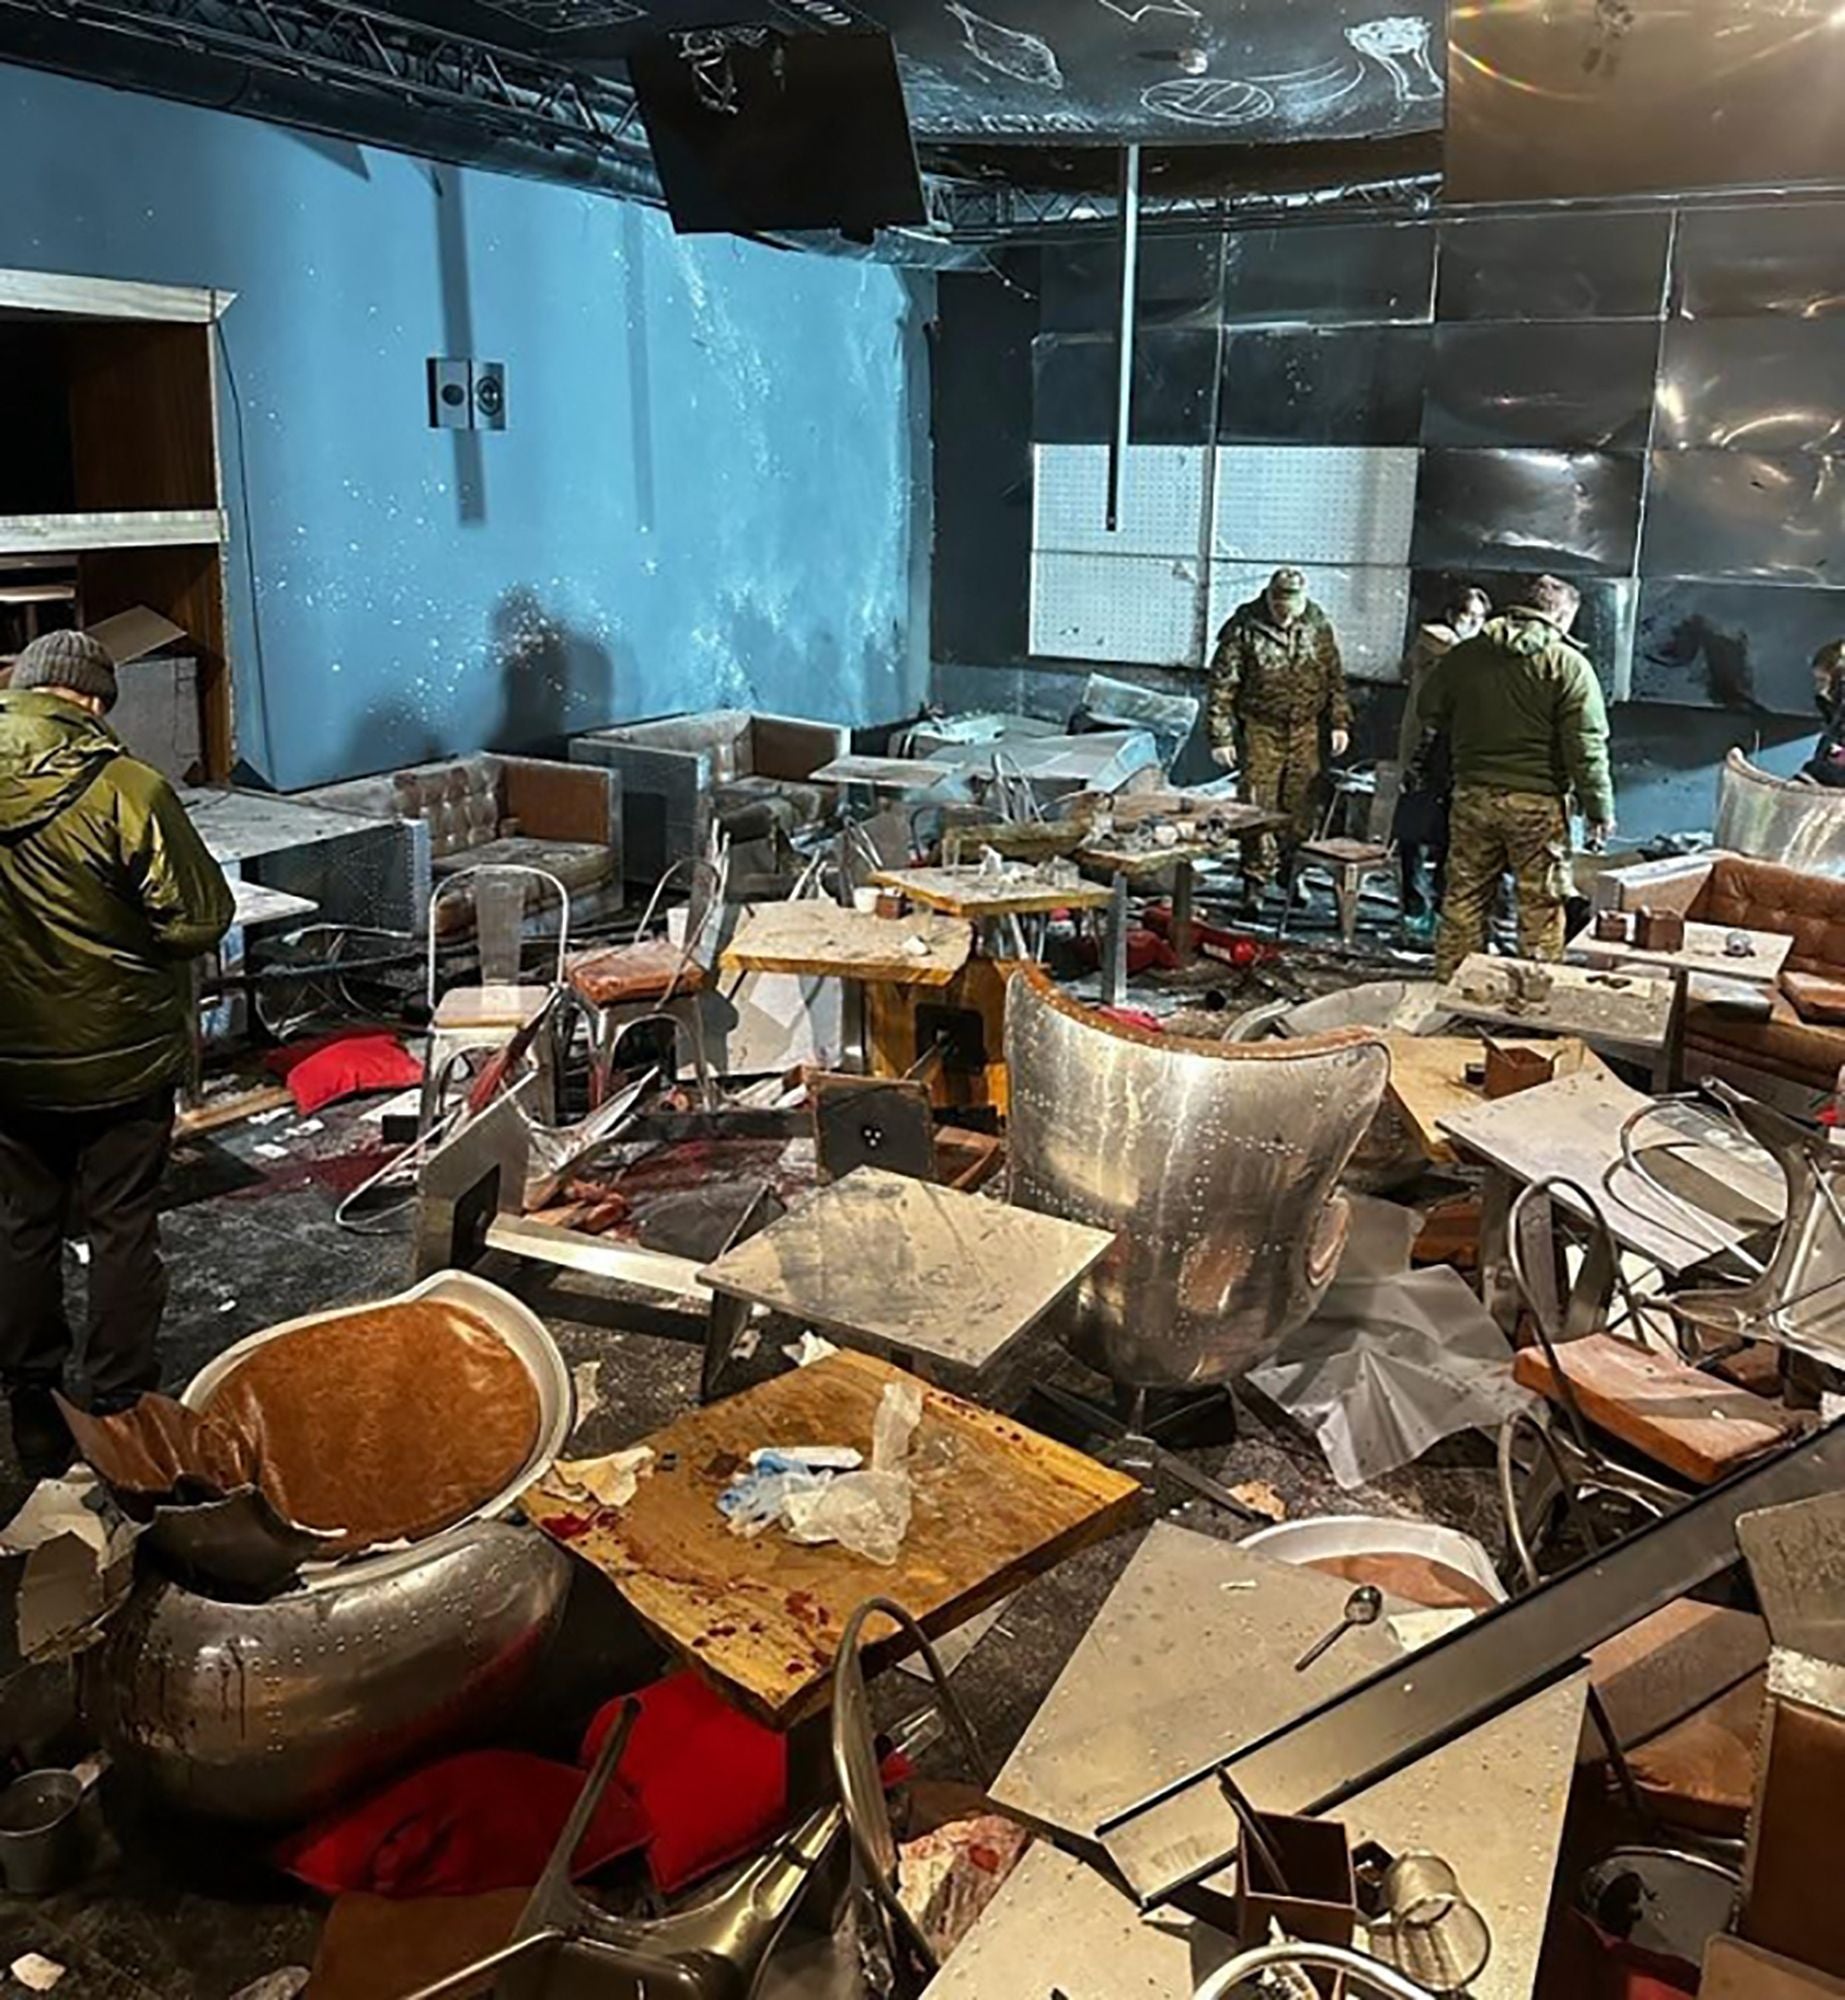 Russian investigators inspect the blasted ‘Street bar’ cafe